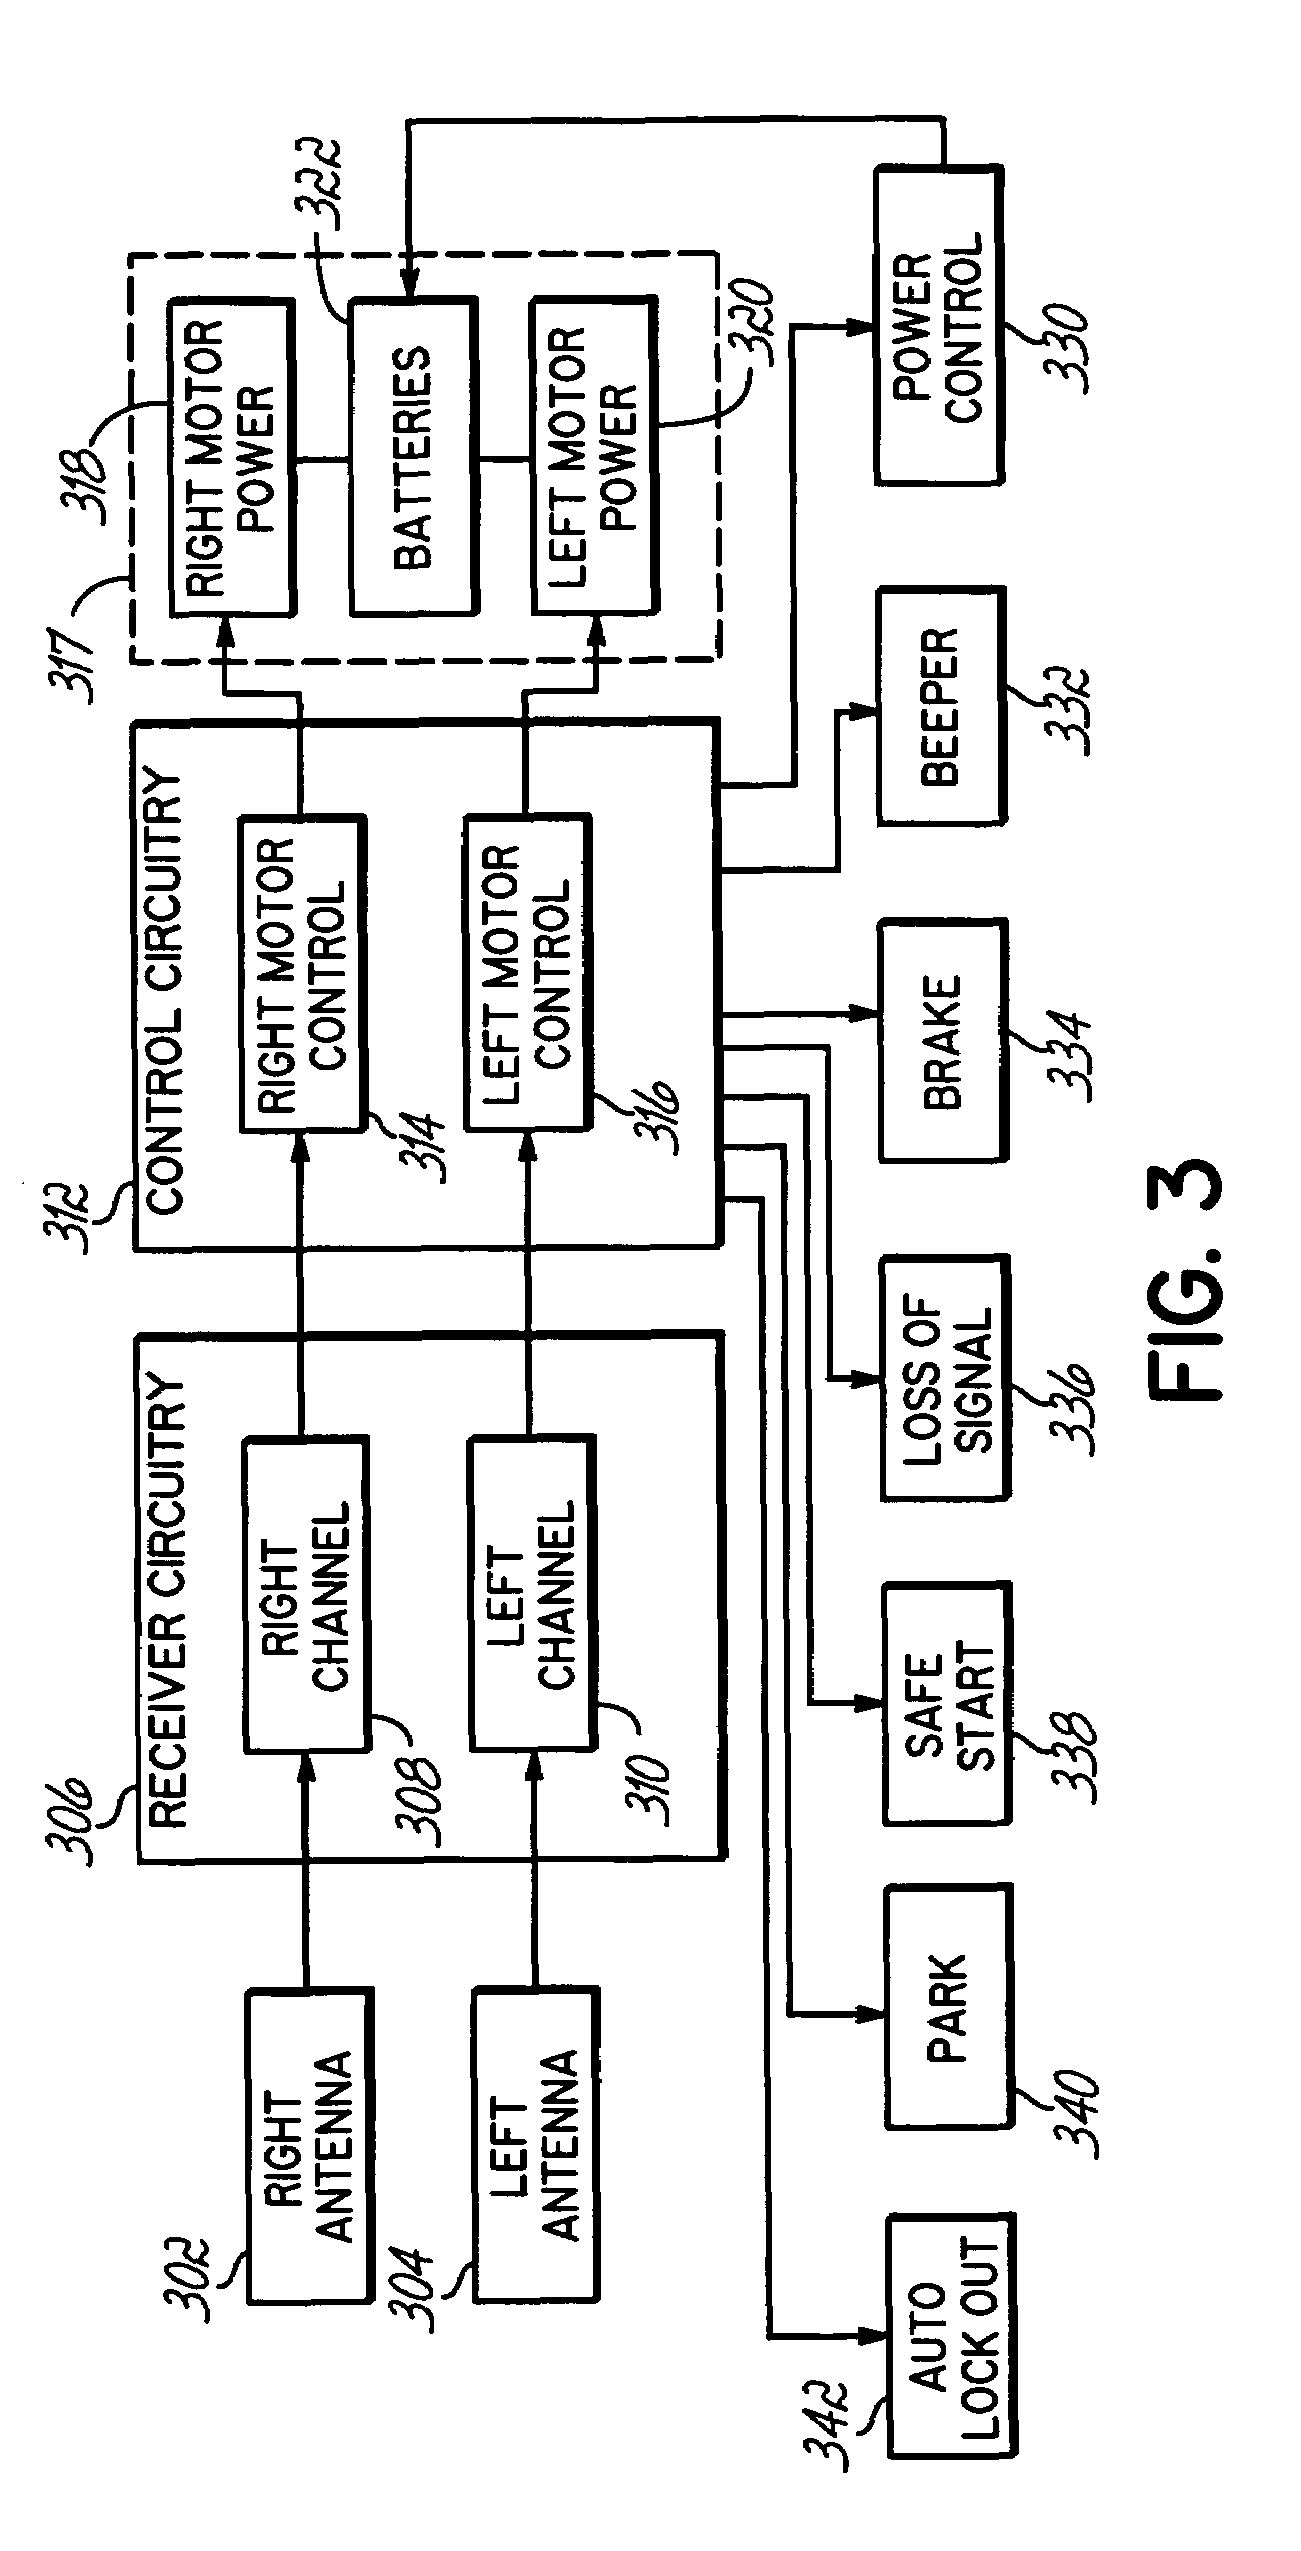 Method and system for a signal guided motorized vehicle